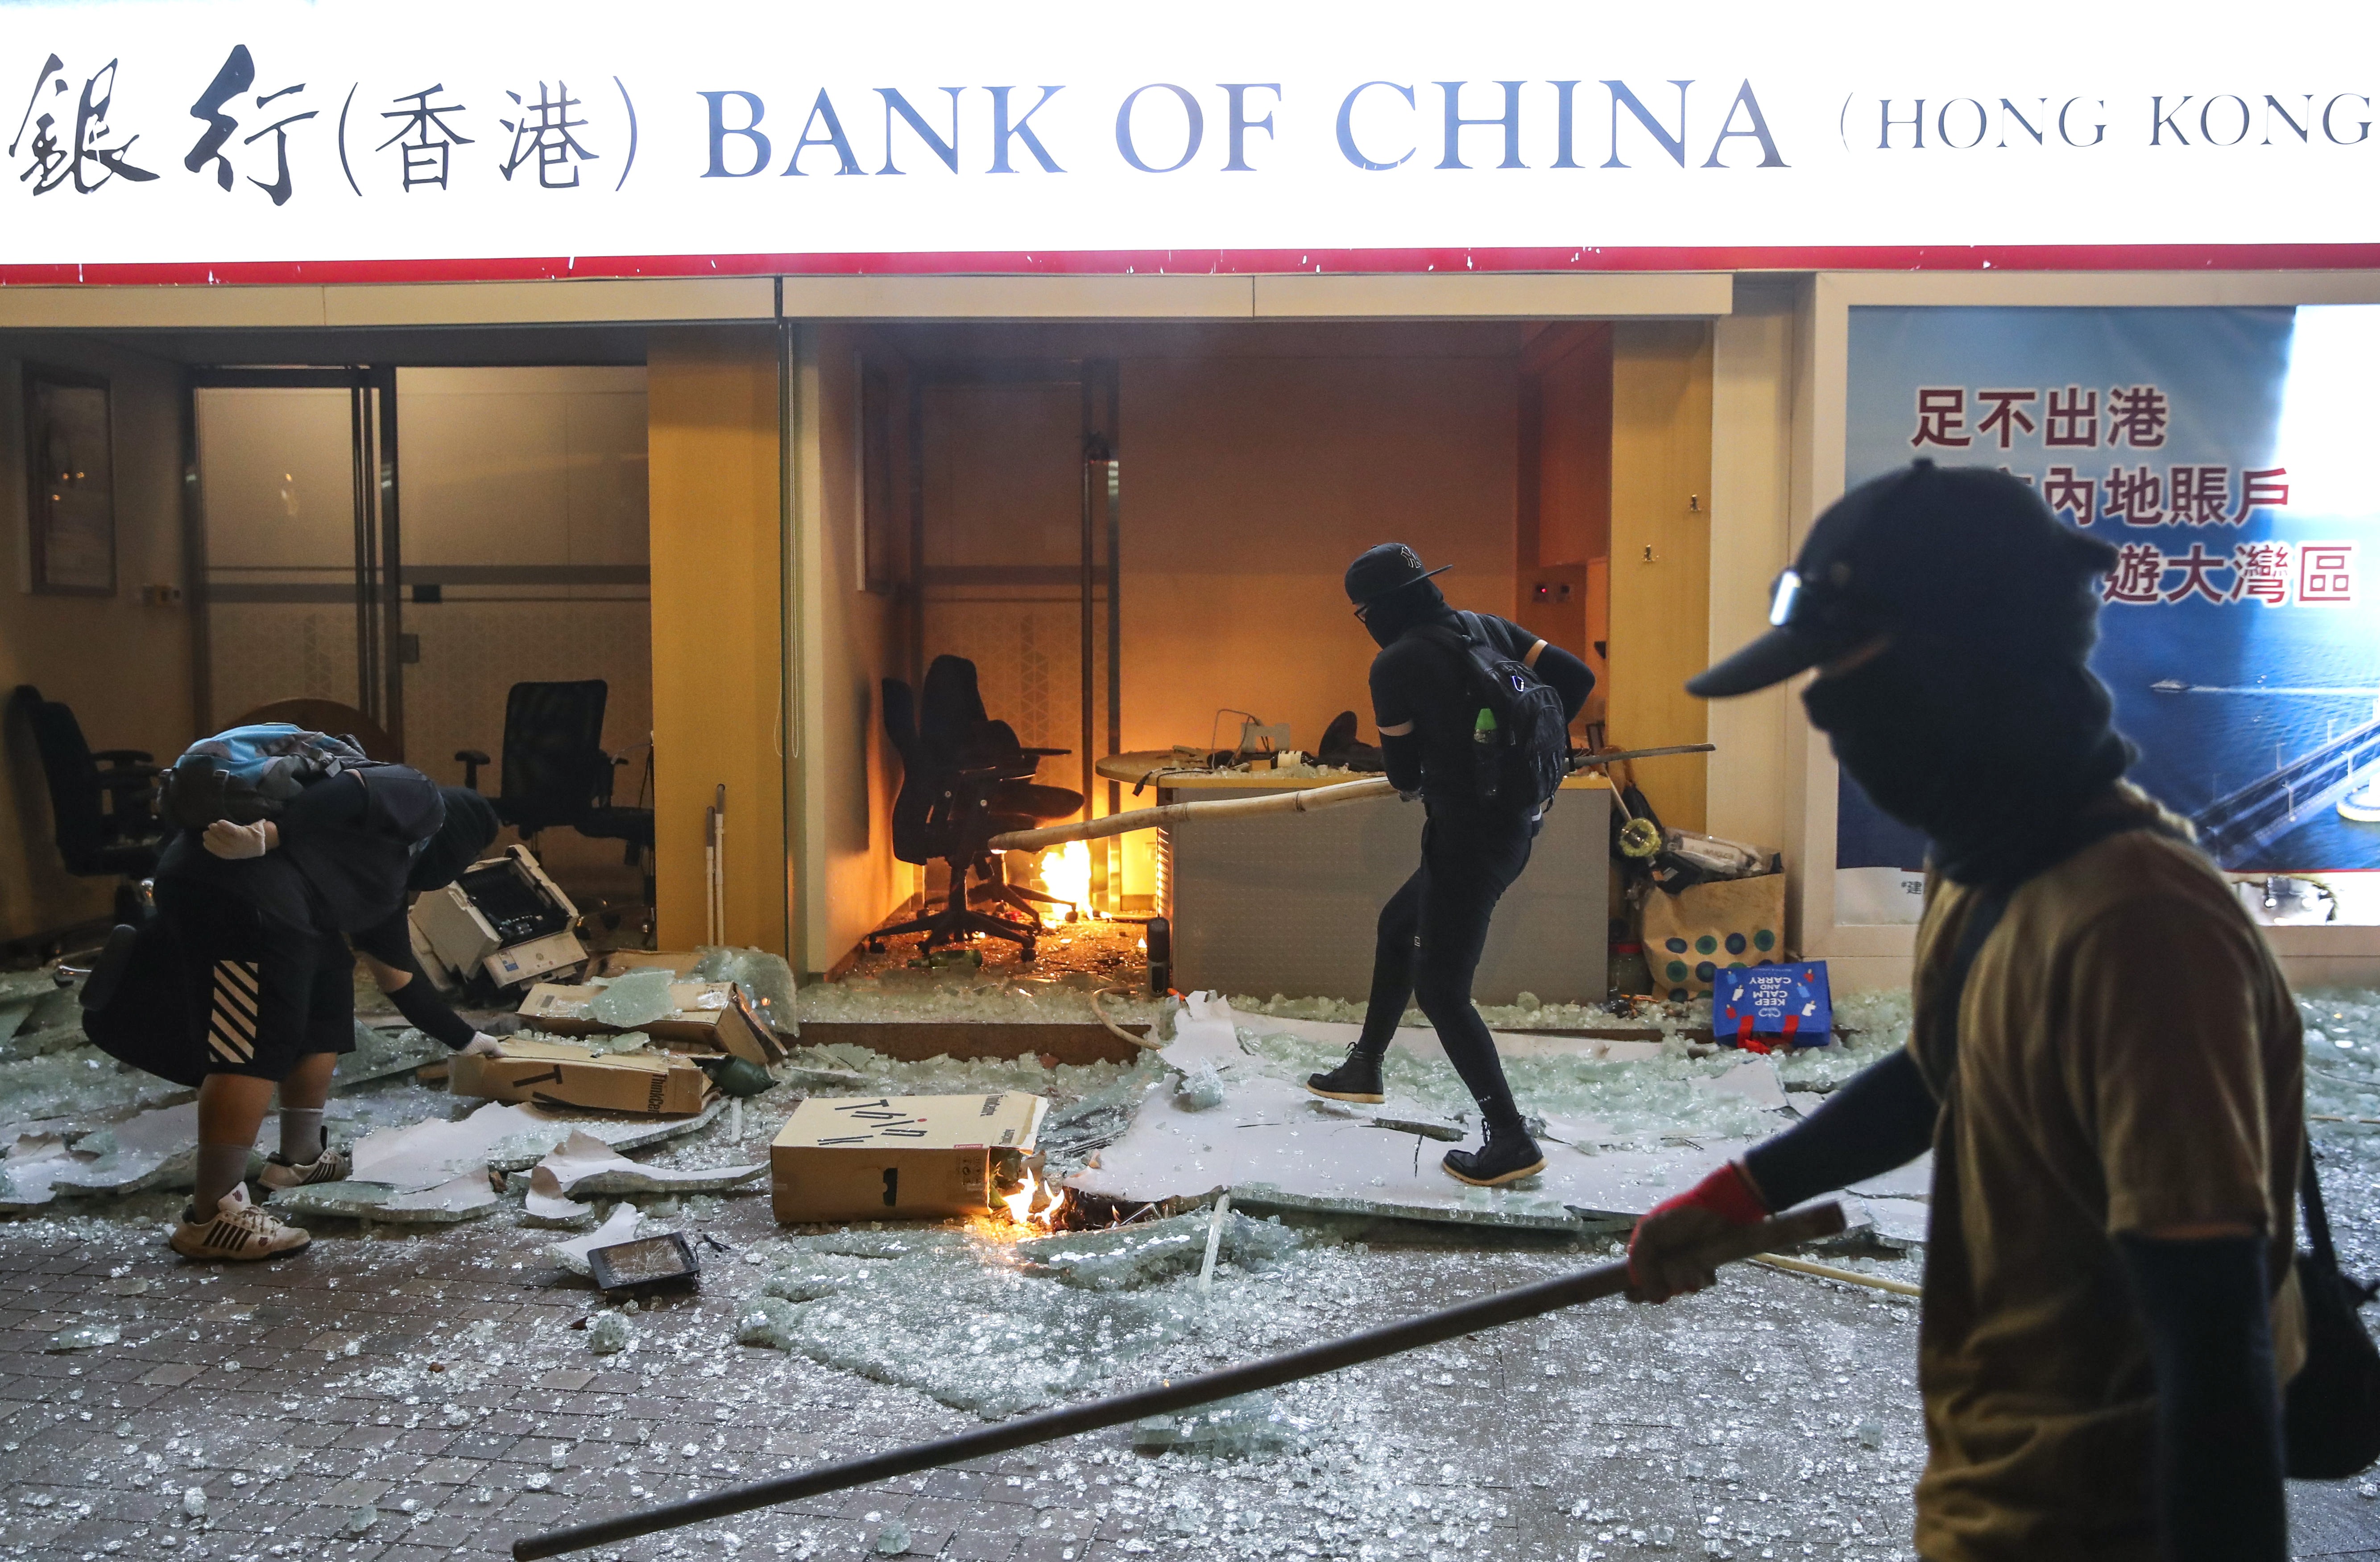 Protesters set a Bank of China branch on fire on Sha Tsui Road in Tsuen Wan on October 4 following a rally against the anti-mask law introduced by the government. Photo: Winson Wong